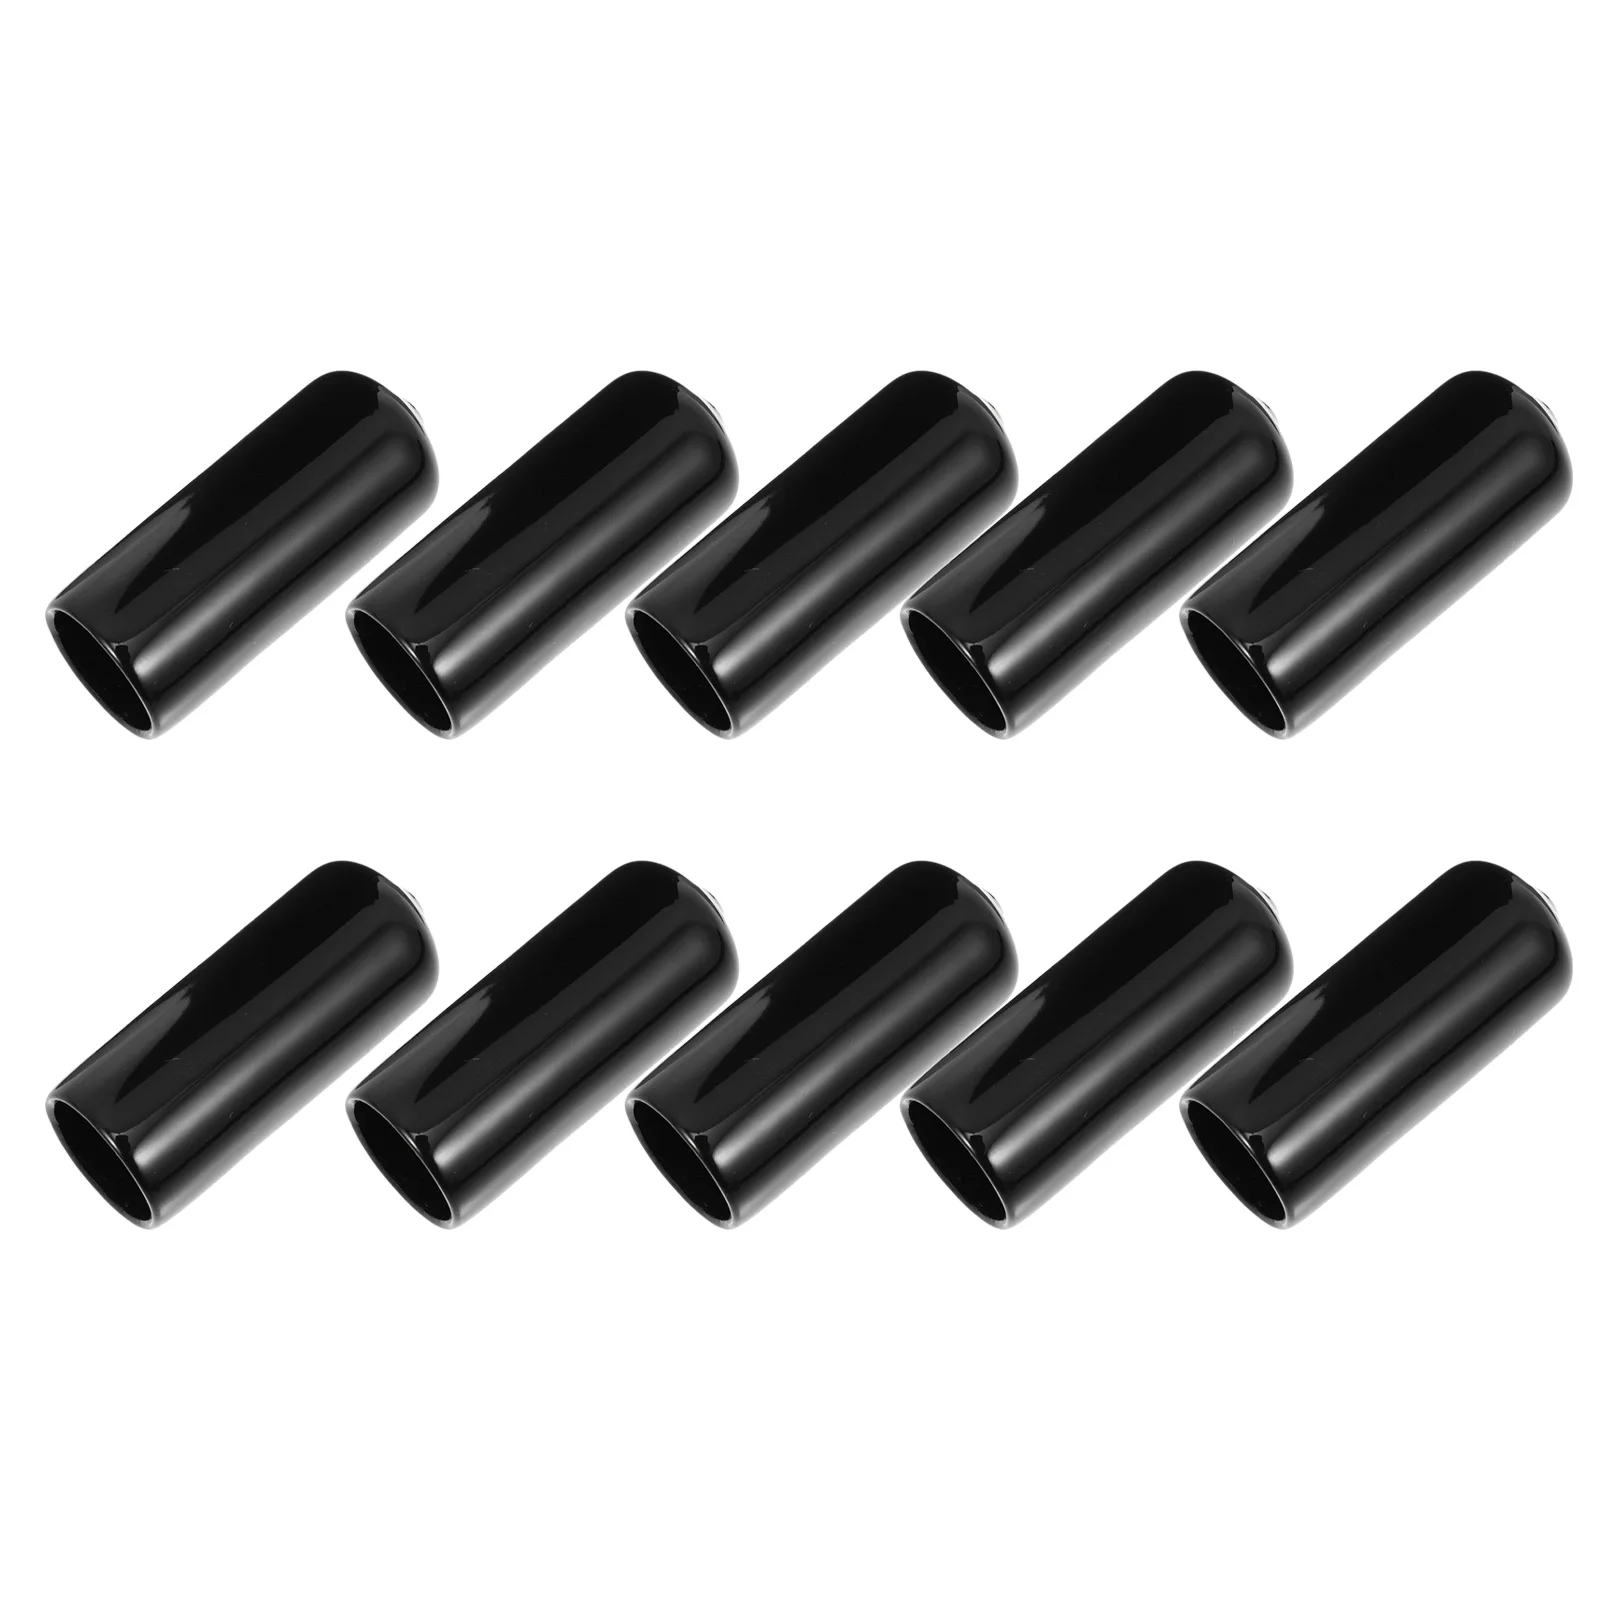 

10 Pcs Case Pool Cue Protector Rubber Billiard Tips Anti-slide Head Covers Table Necessity Lids